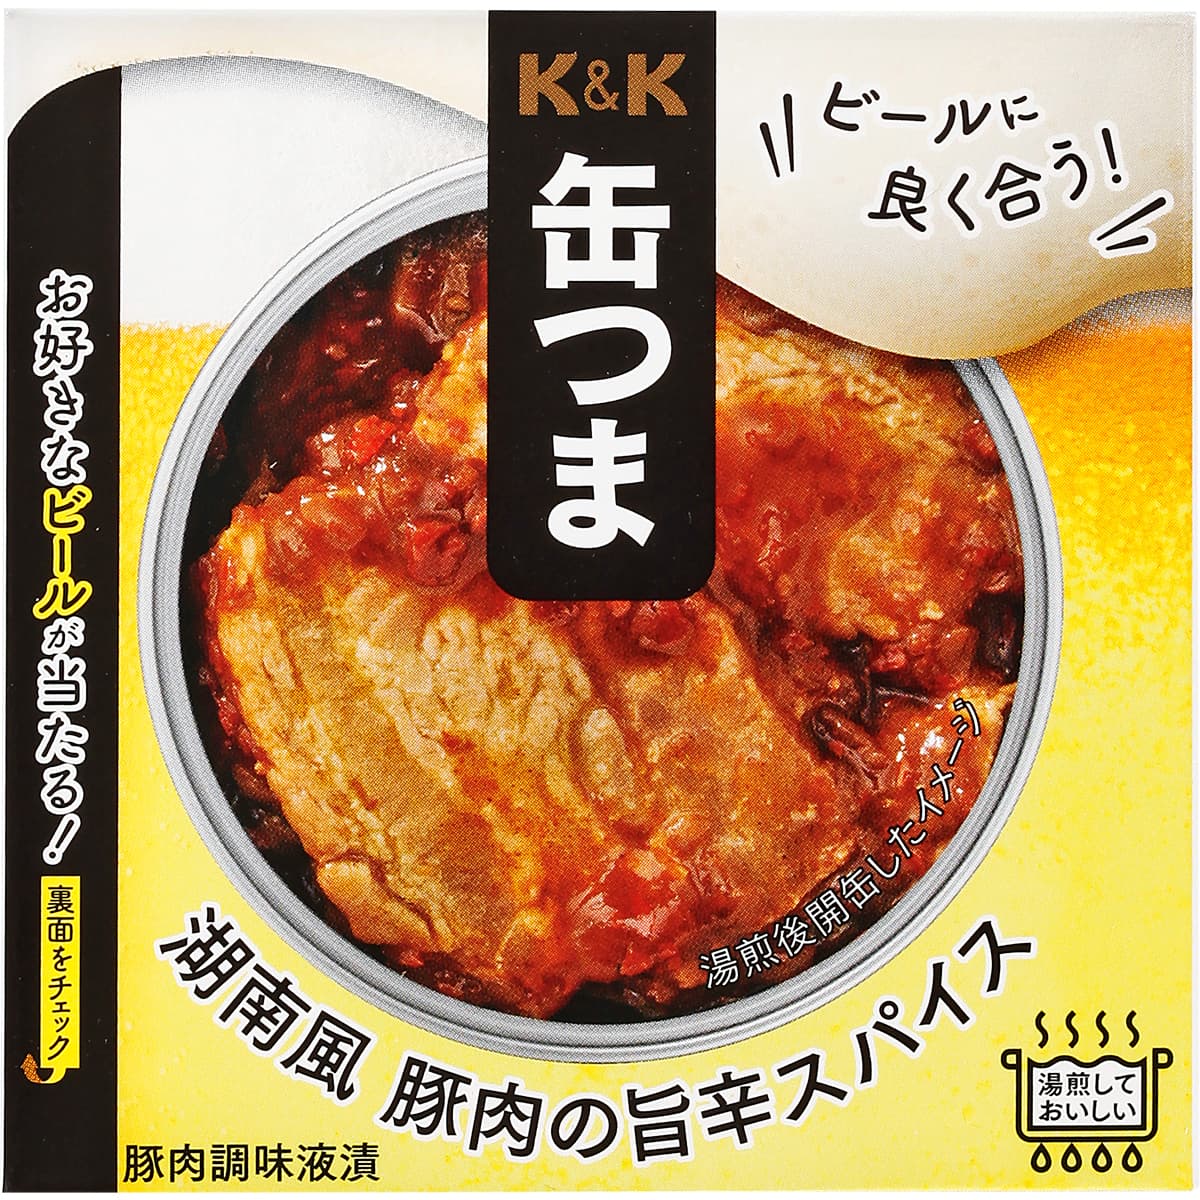 K&amp;K Canned Tsuma Hunan Style Pork Spicy Spicy (Limited Time Beer Package)